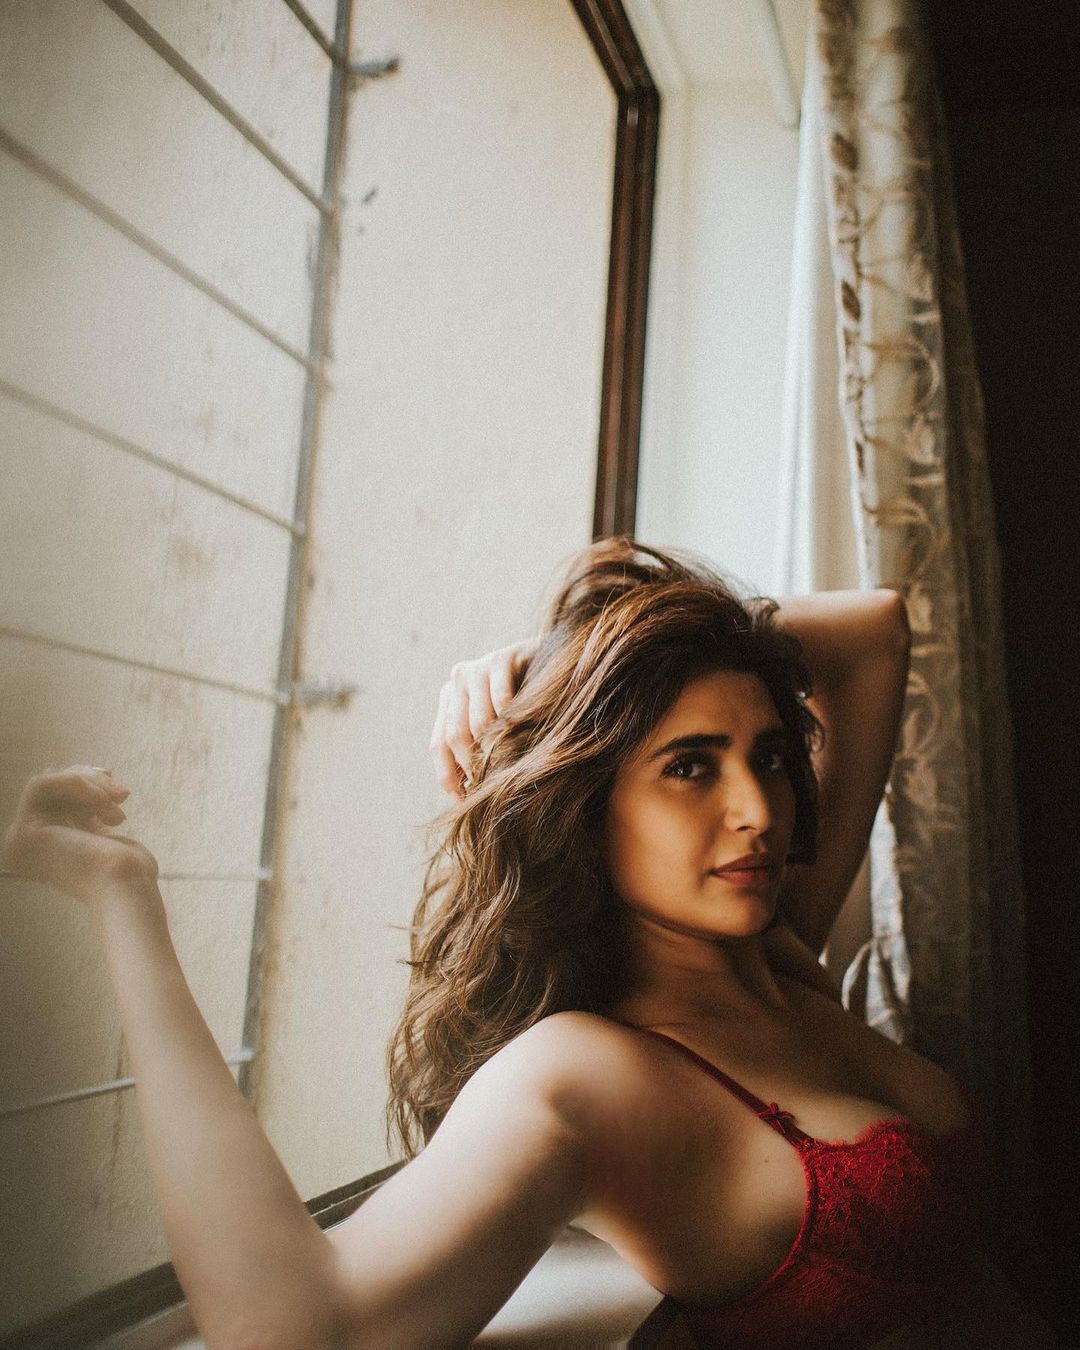  She also shared this sensuous photo in a red bra, perfect for the Valentine month. (Image: Instagram)